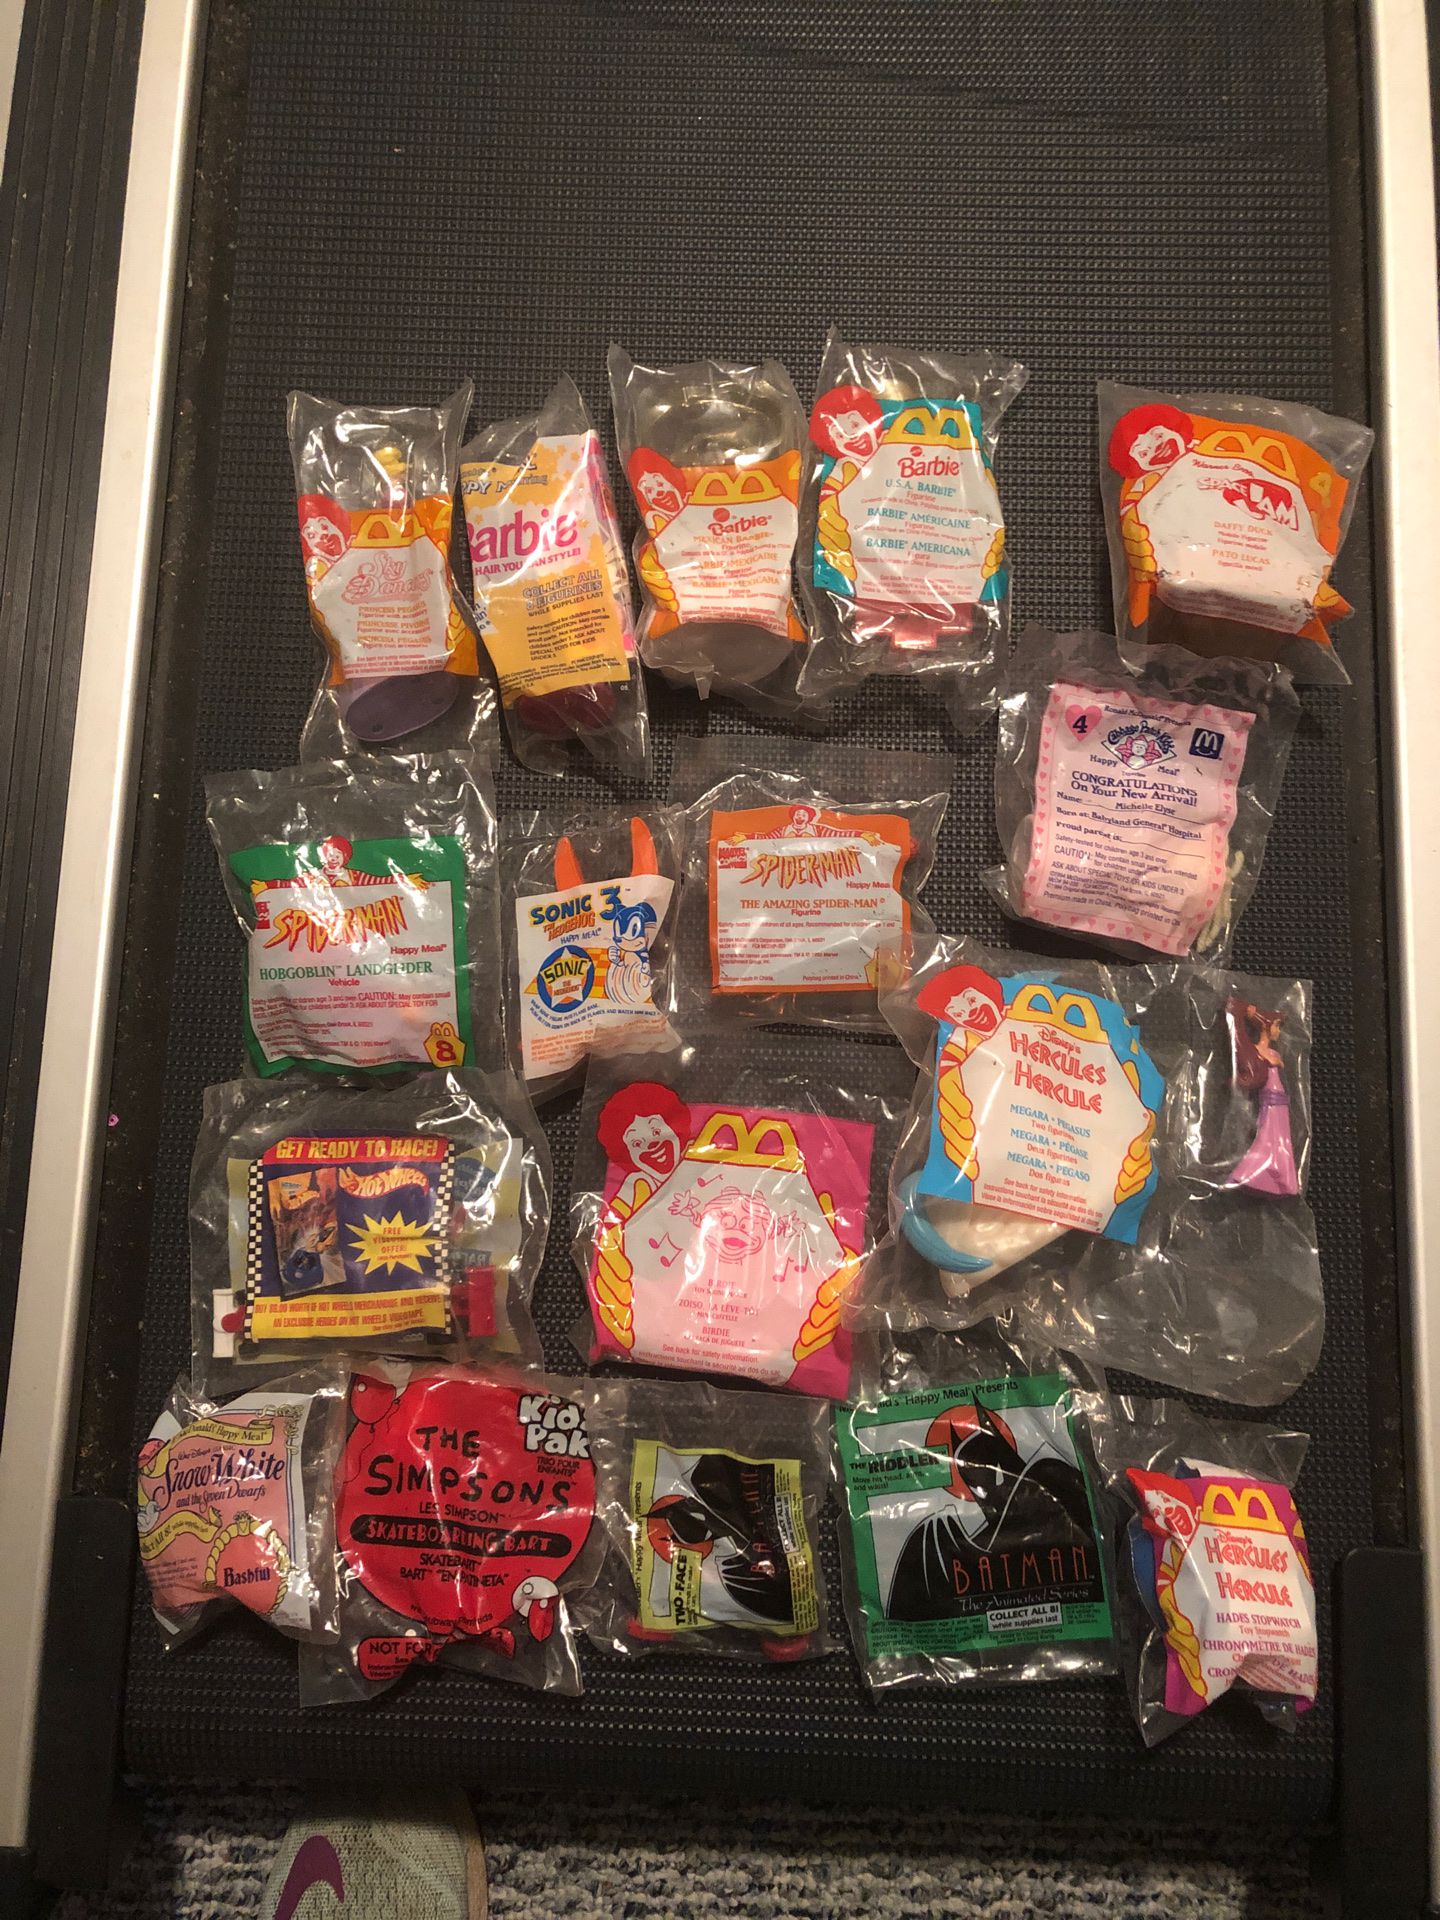 80’s/90’s McDonald’s vintage happy meal toys still in original wrappers. All for 40.00